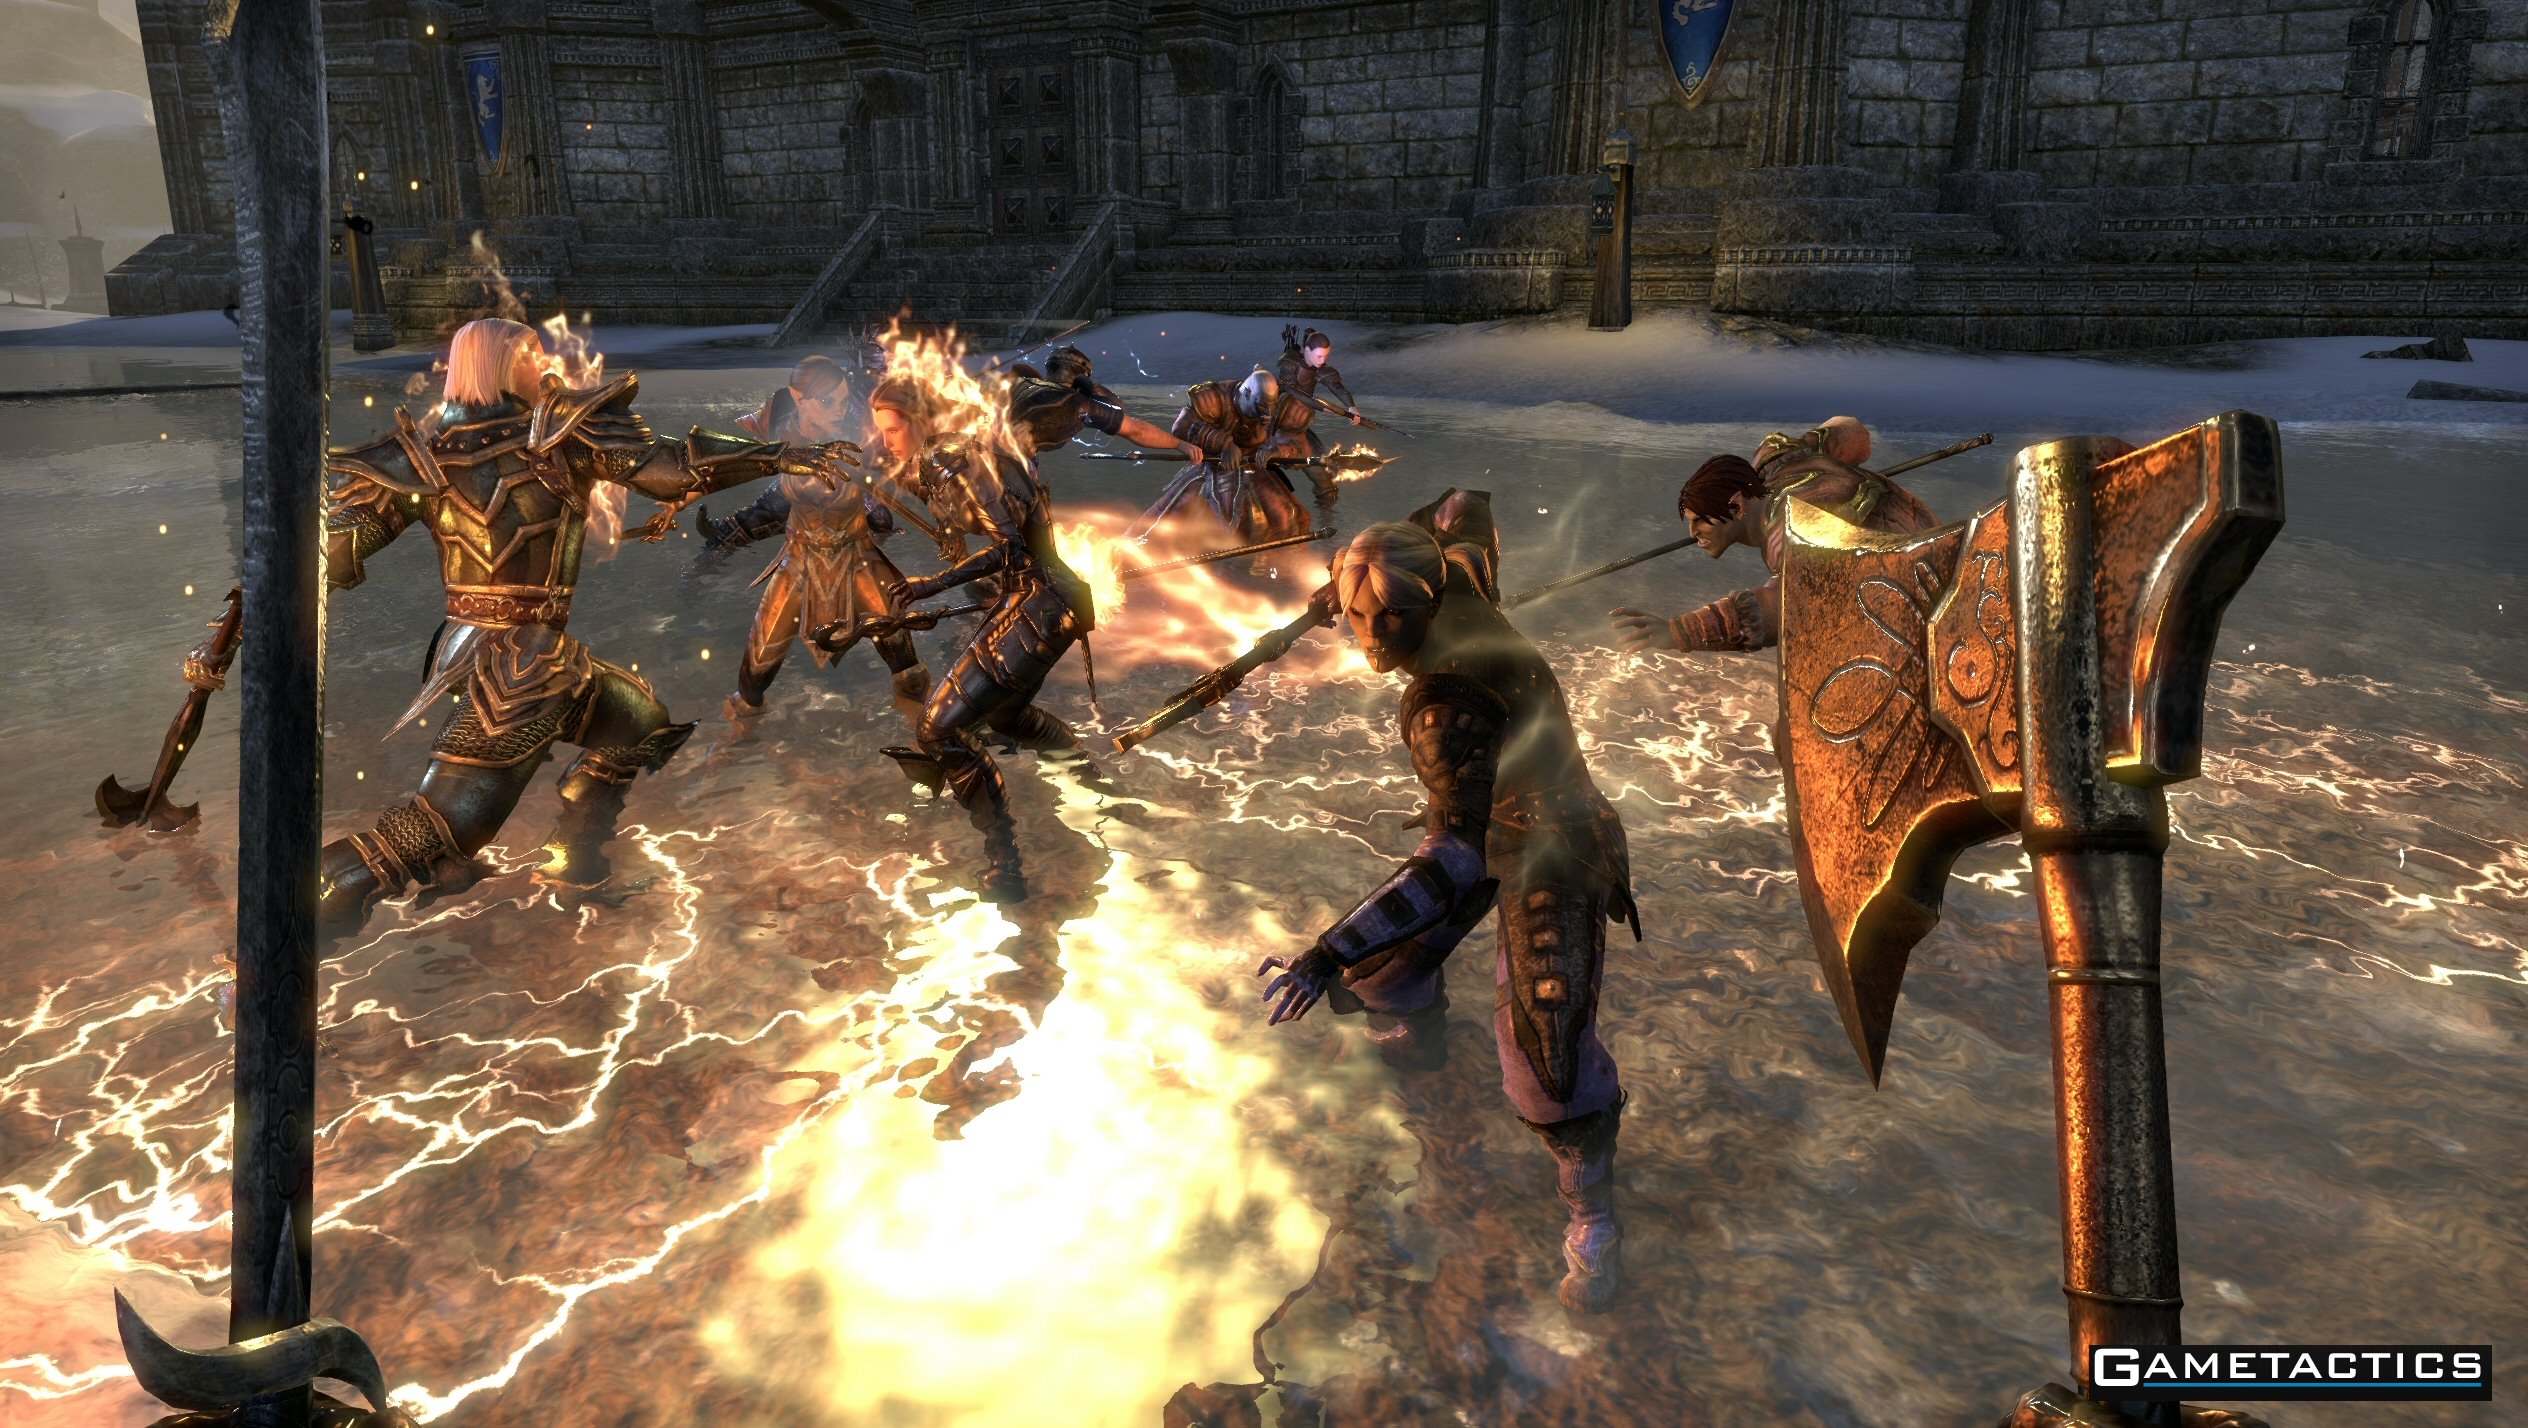 The Elder Scrolls Online – Hands on Preview Part 1 Windows PC (Also on Mac, PlayStation 4 and Xbox One)